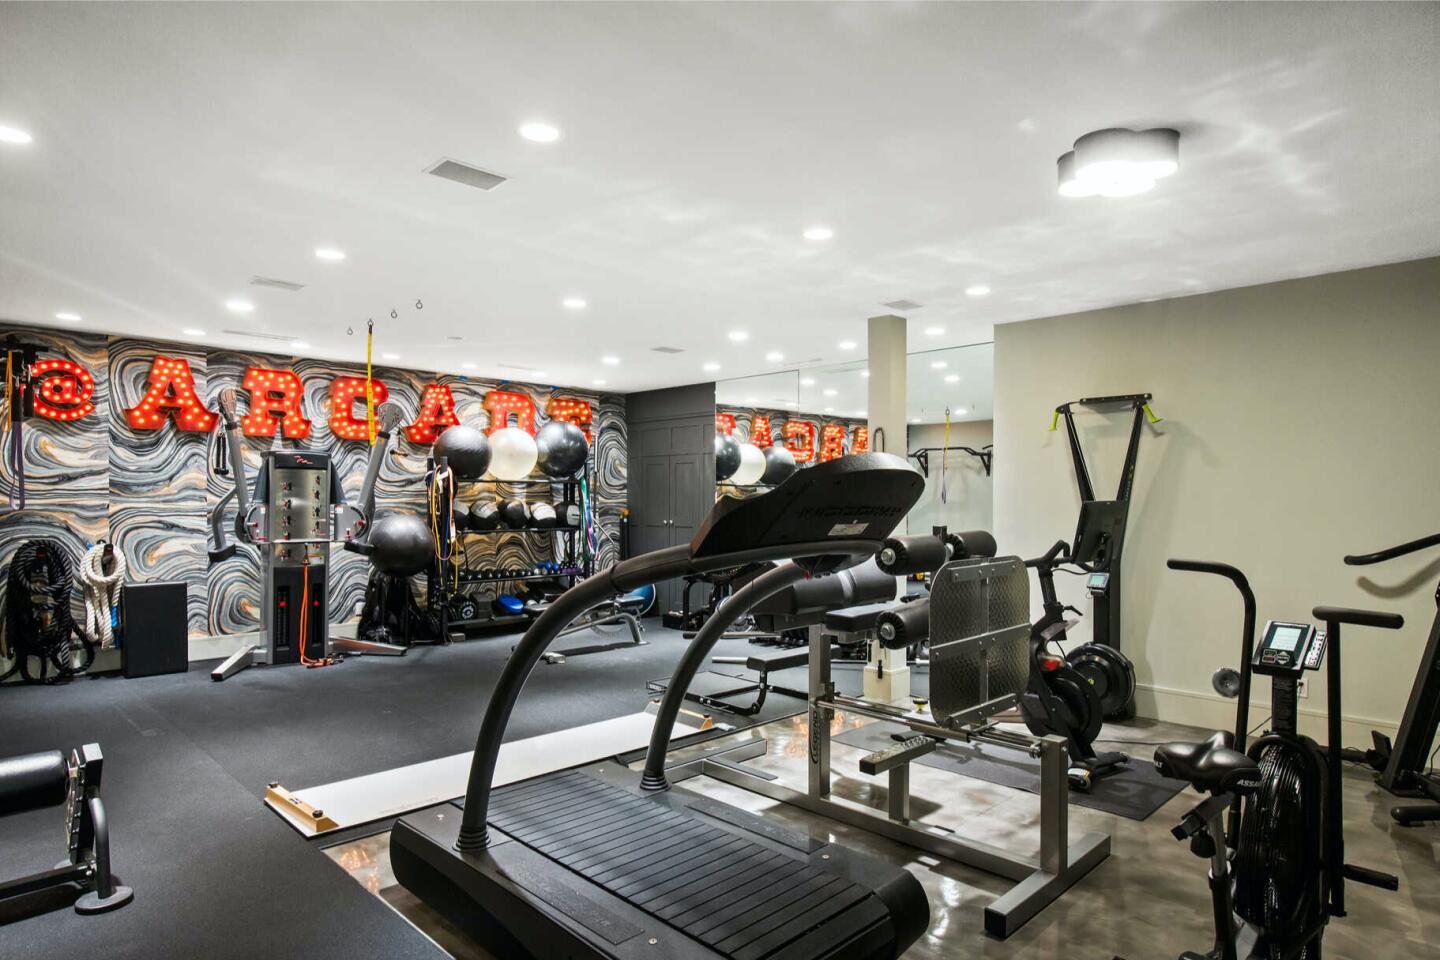 The gym with exercise equipment.